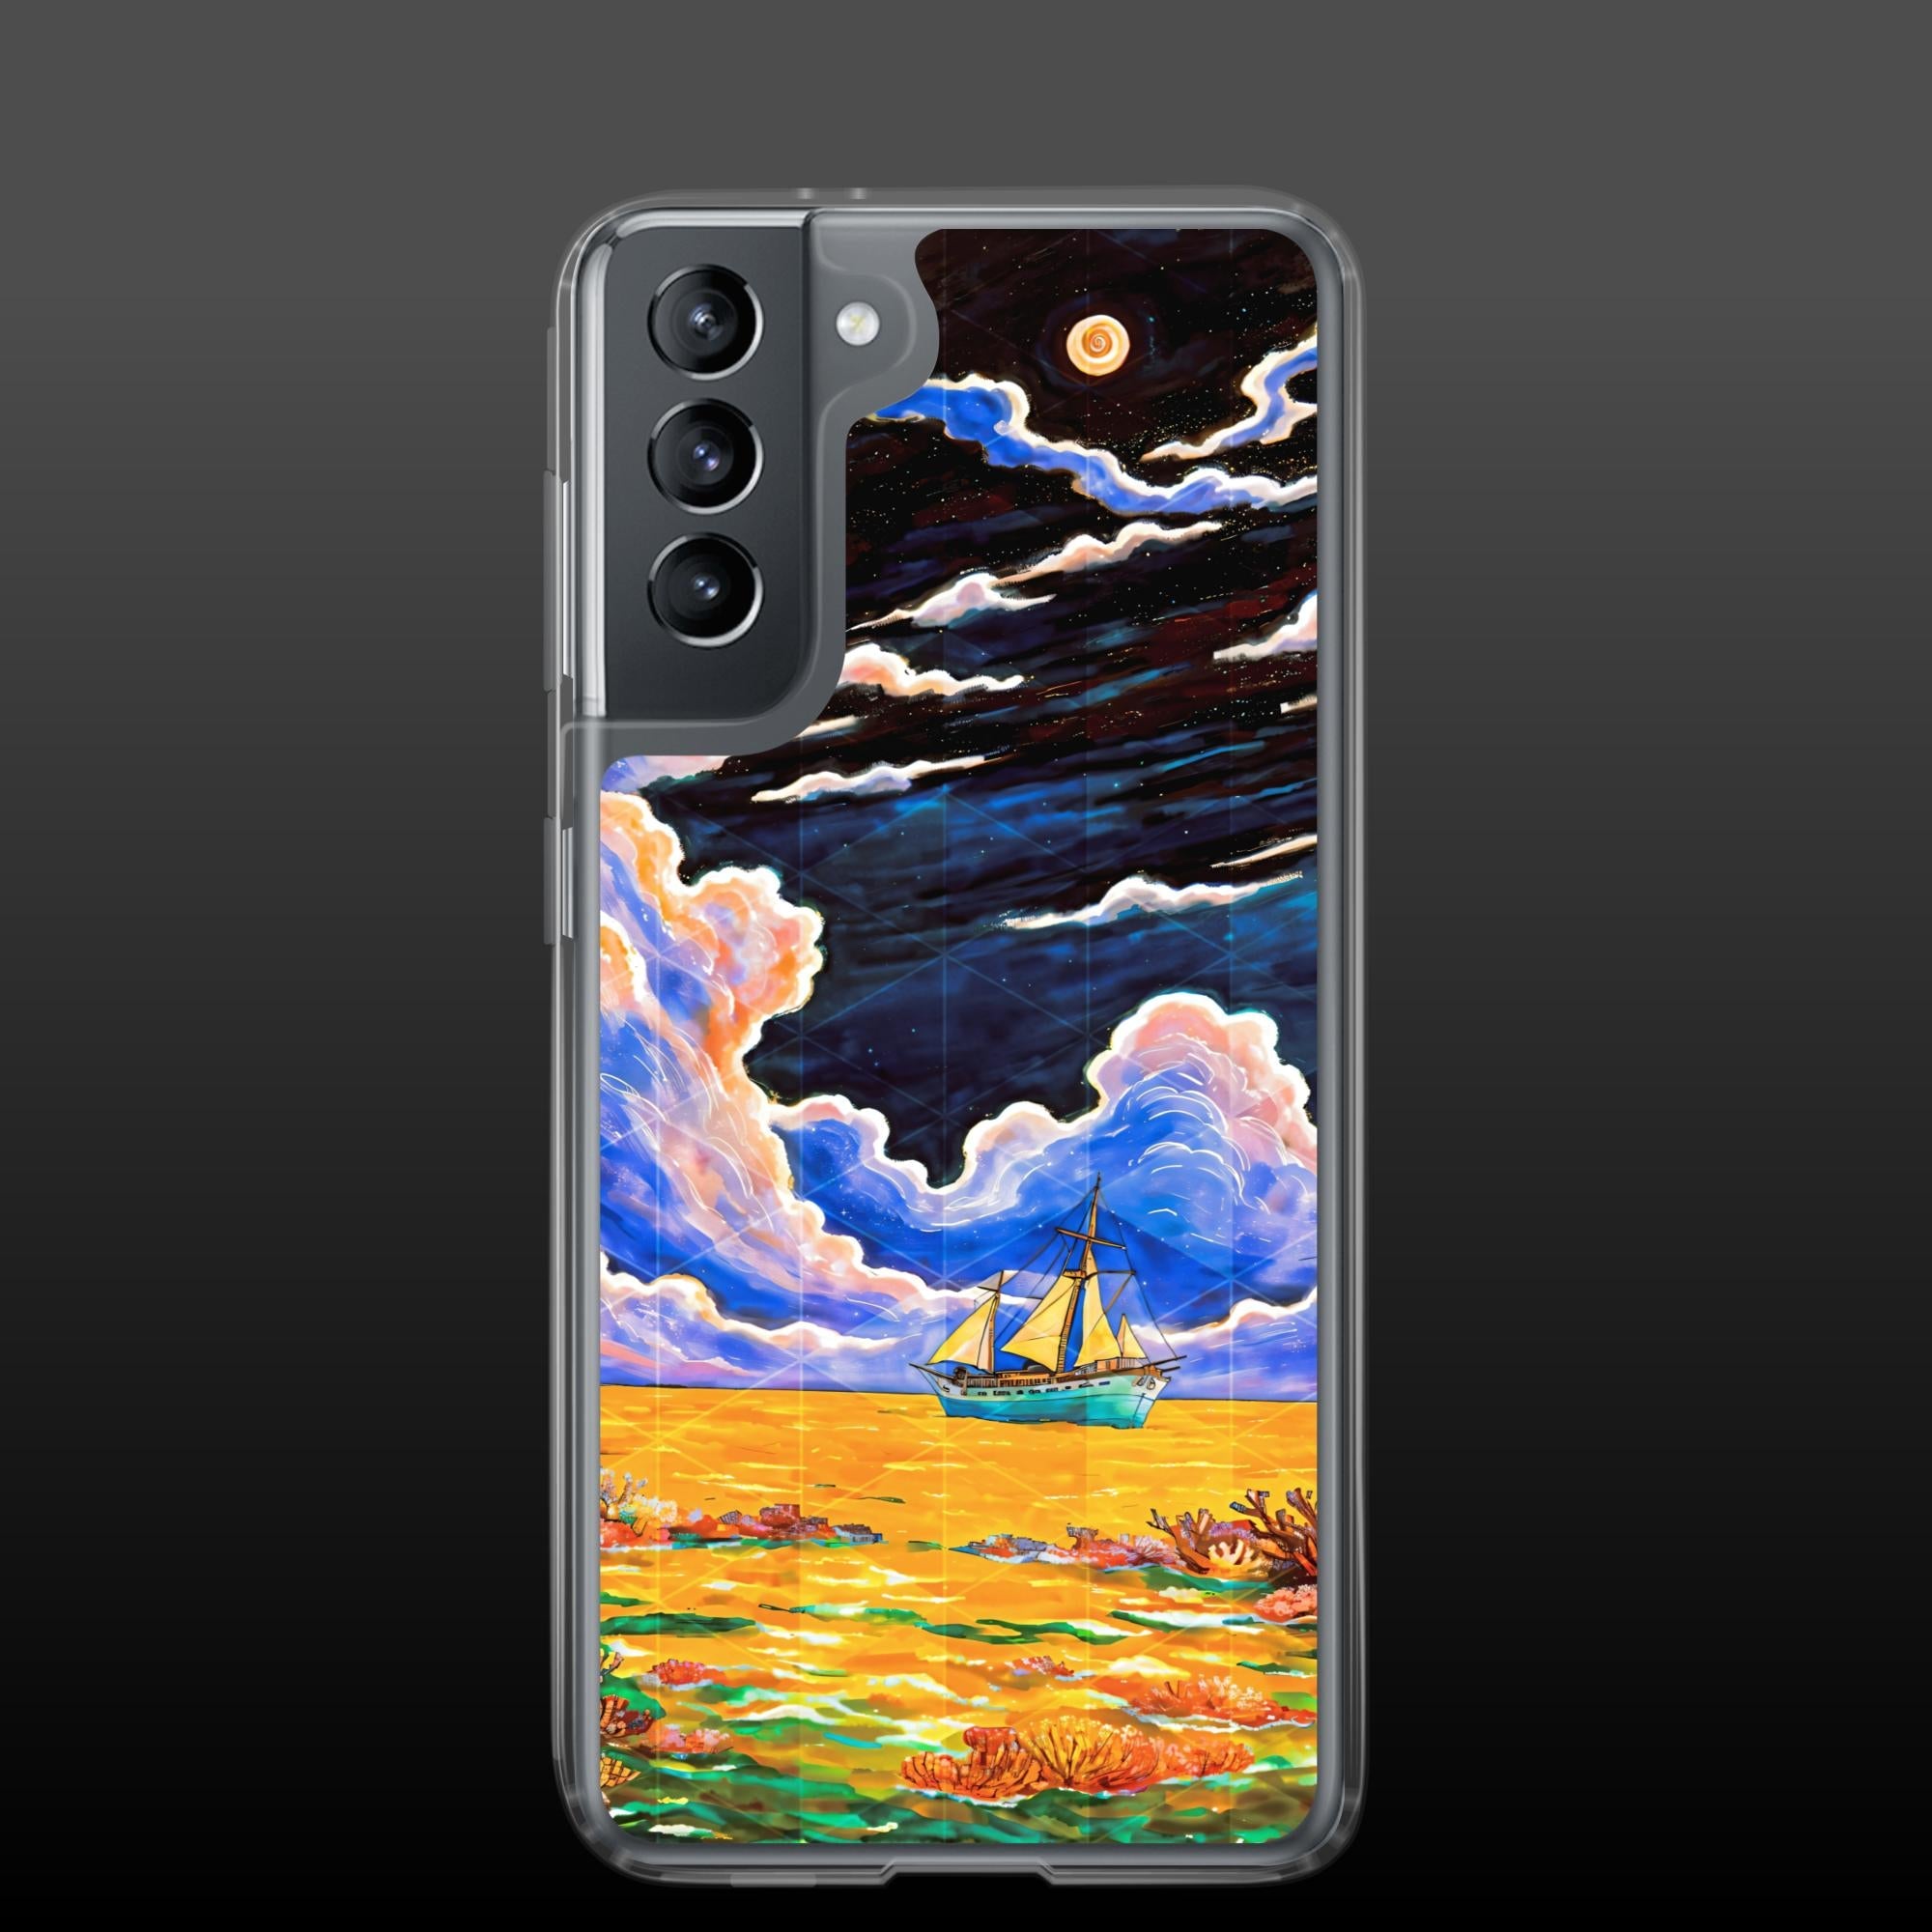 "Amber sea" clear samsung case - Clear samsung case - Ever colorful